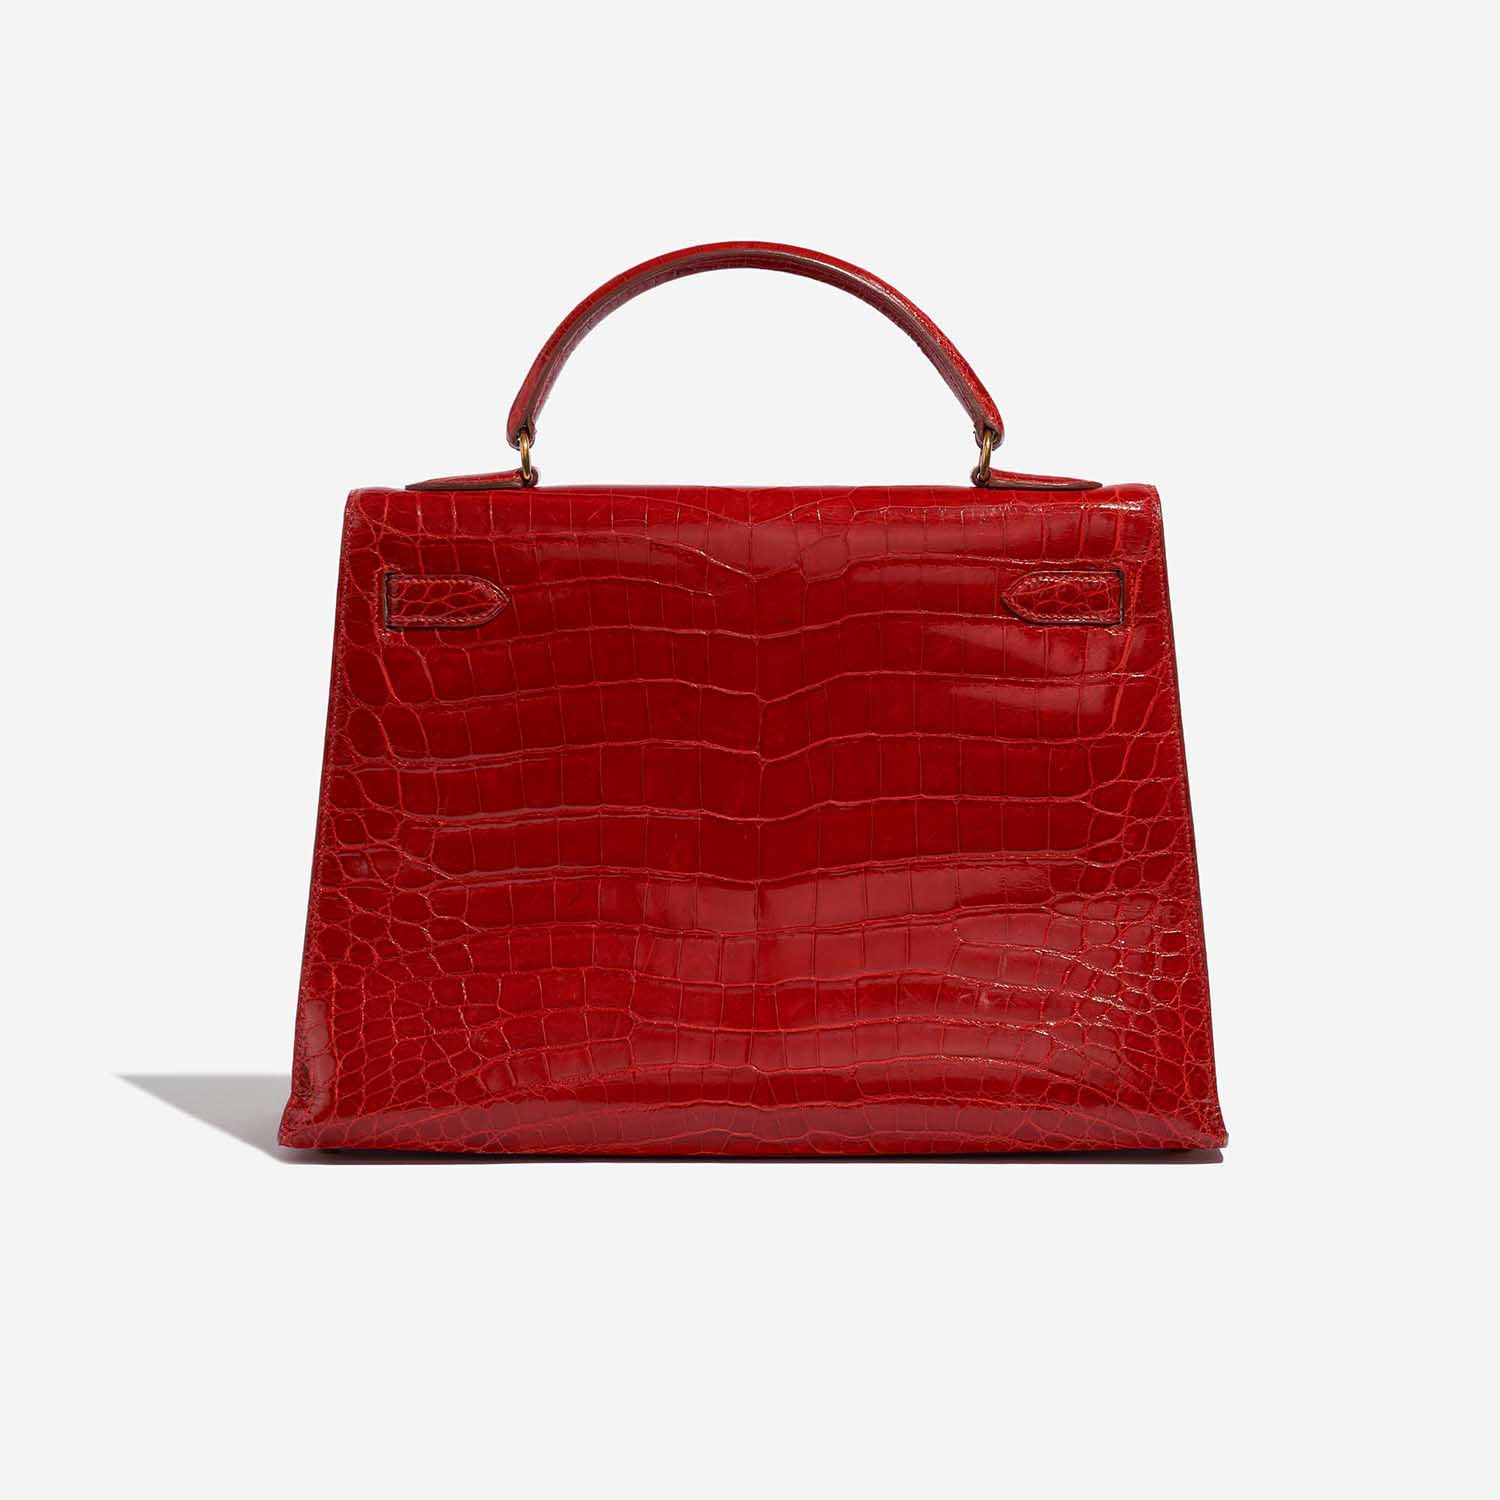 Pre-owned Hermès bag Kelly 32 Niloticus Crocodile Braise Red Back | Sell your designer bag on Saclab.com